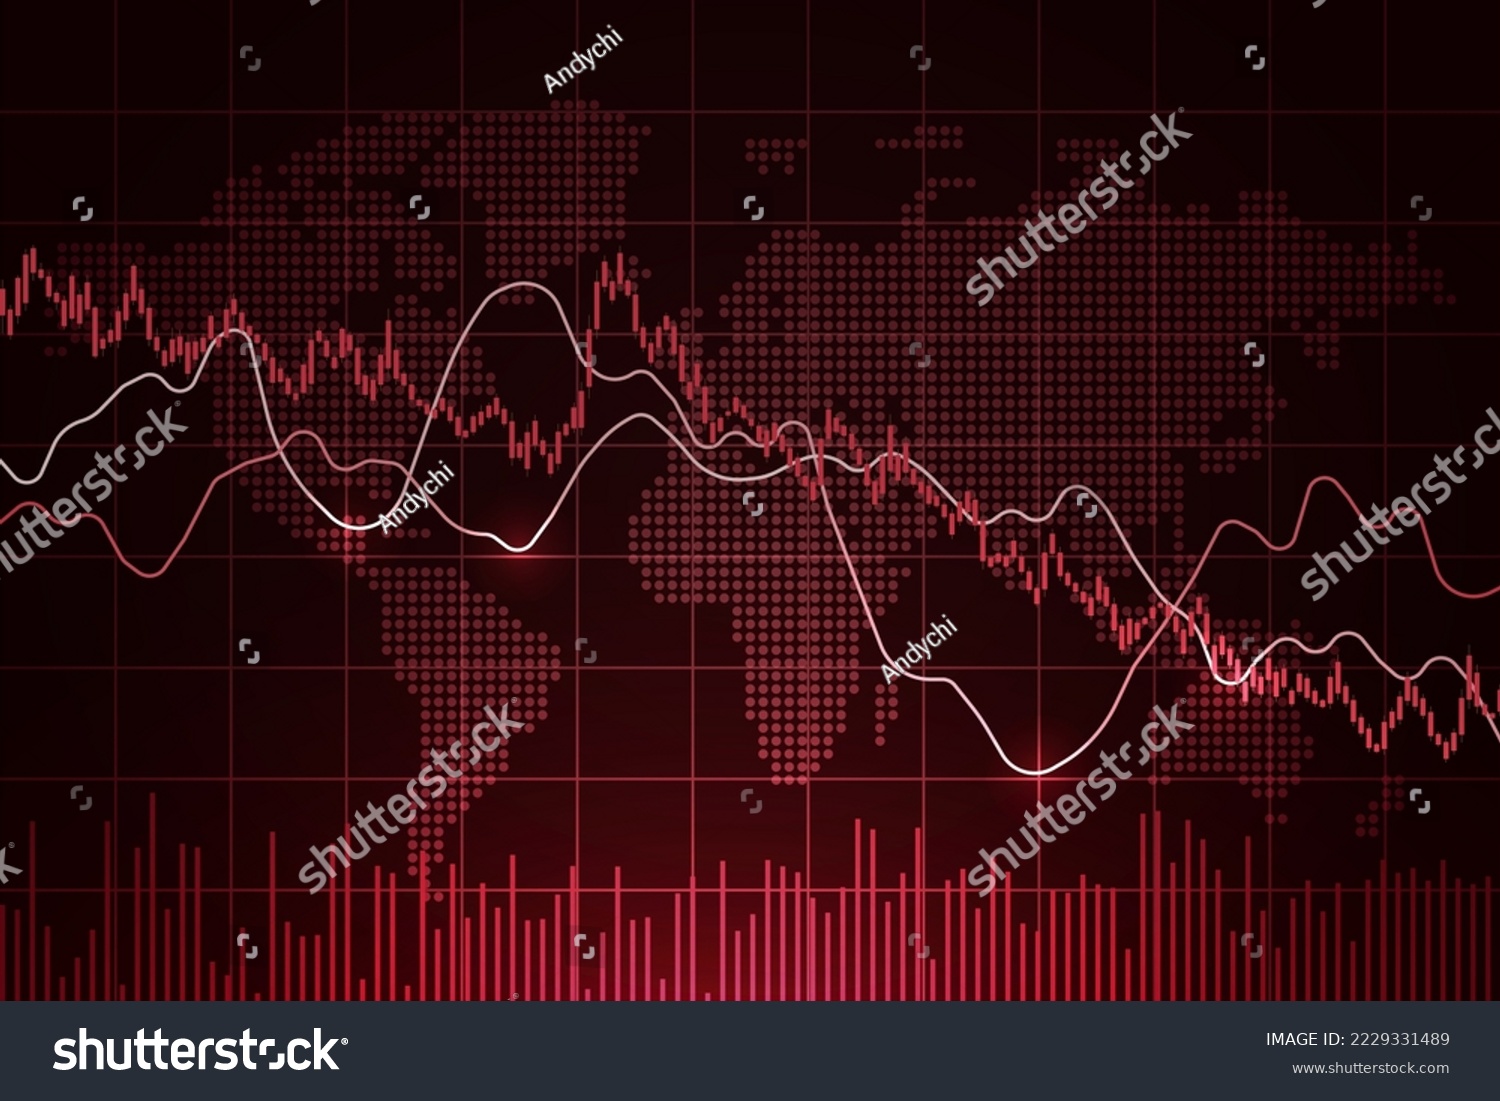 SVG of World stock market index fall. Financial crisis. Candlestick chart, line graph and bar chart. Stock market growth illustration. Financial market decrease background. Neon color. Vector illustration svg